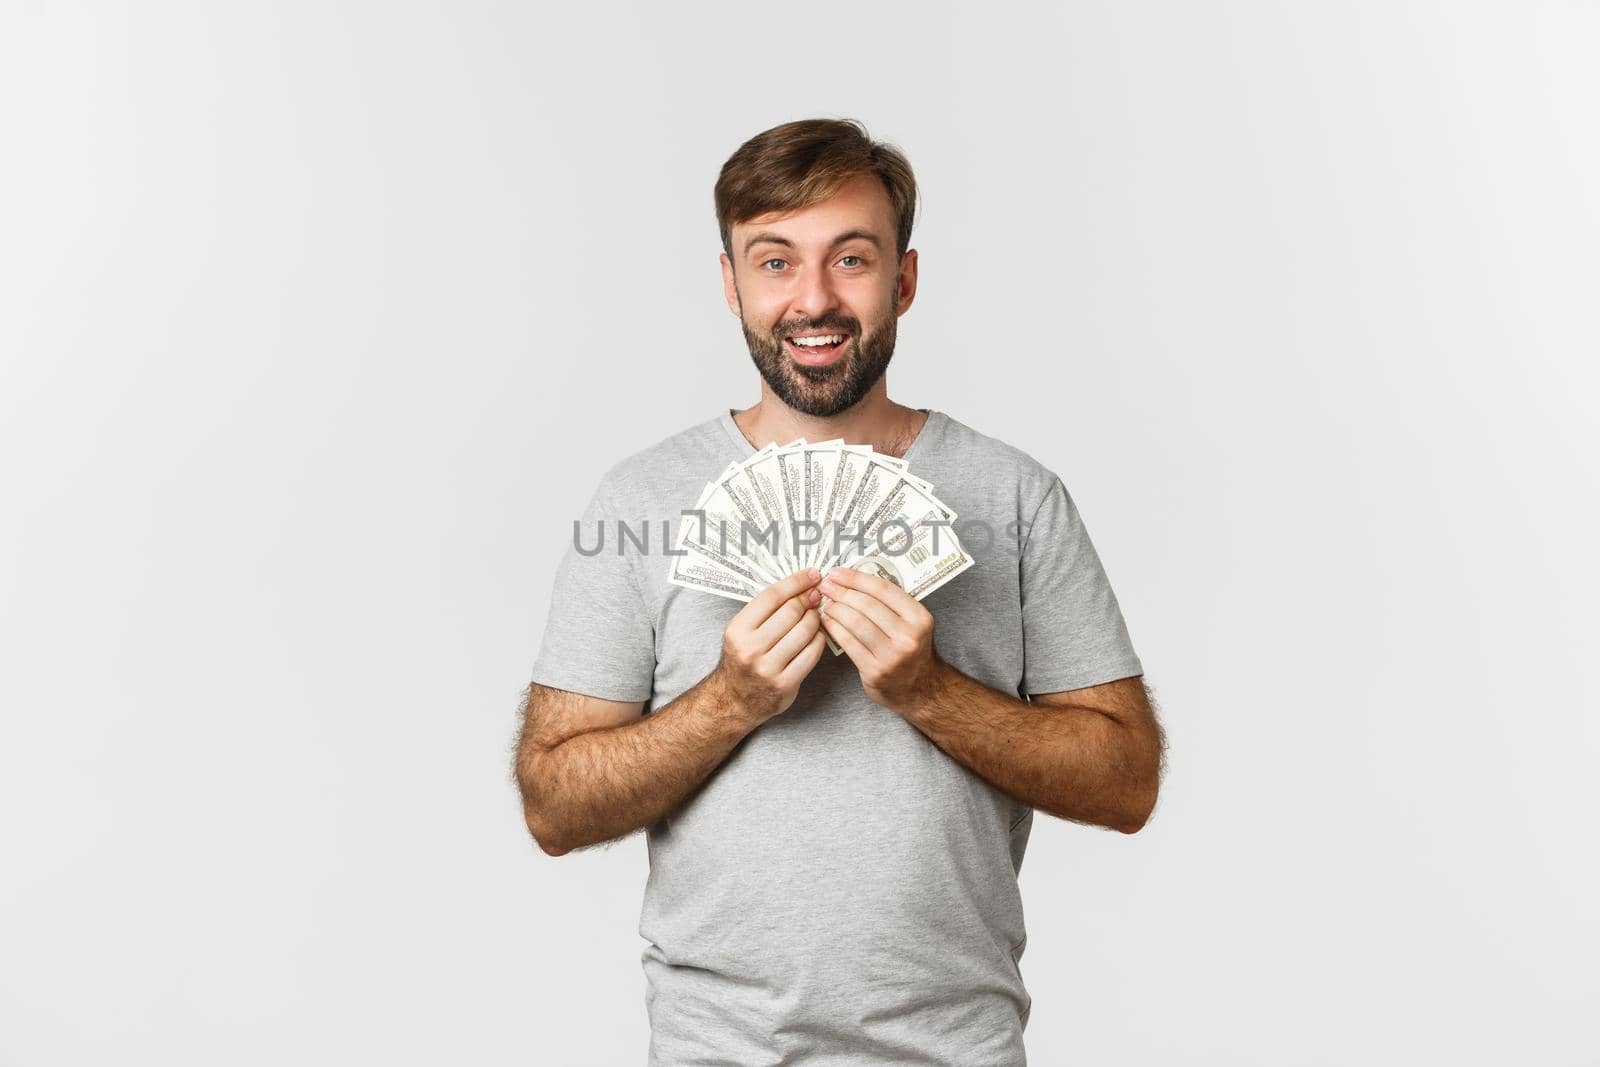 Smiling man with beard, wearing gray t-shirt, showing money, winning prize, standing over white background.